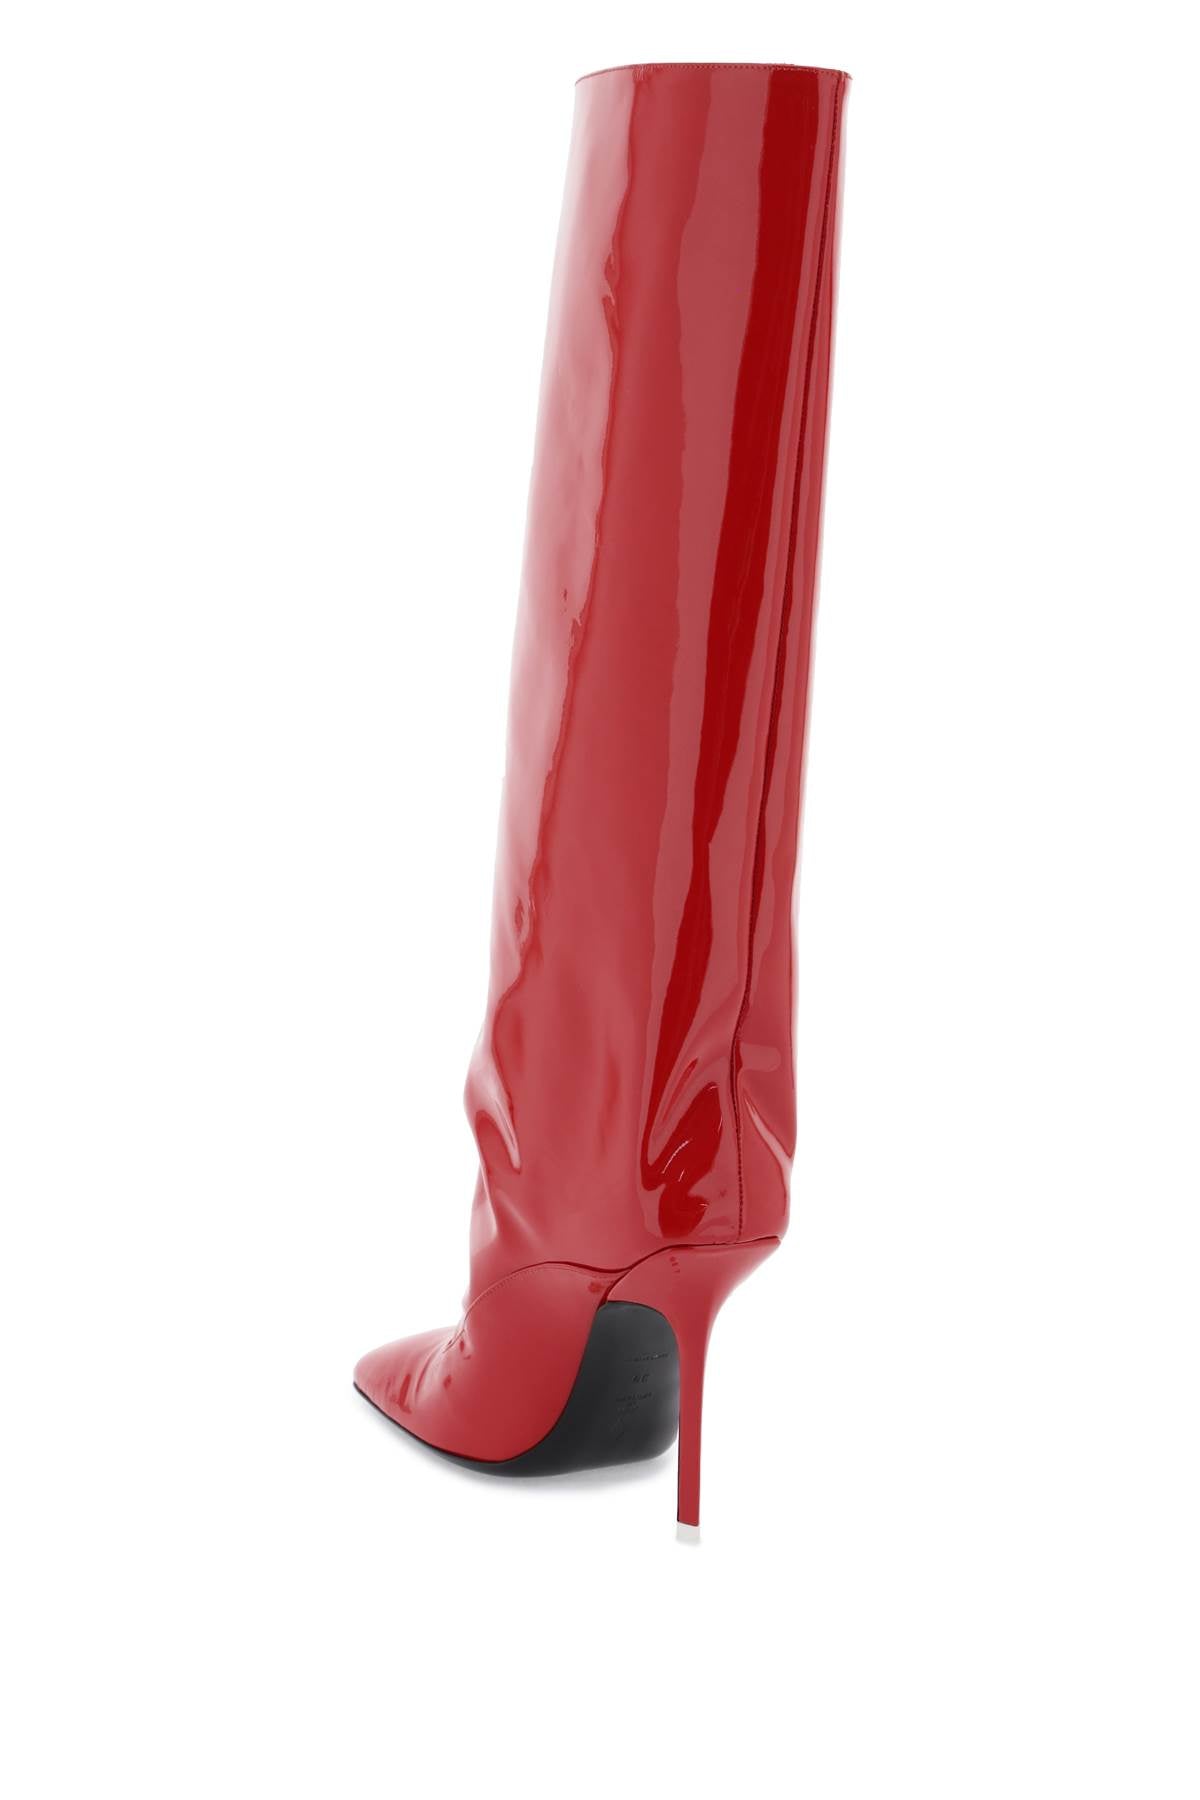 Red Patent Leather Square Toe Tube Boots for Women from THE ATTICO